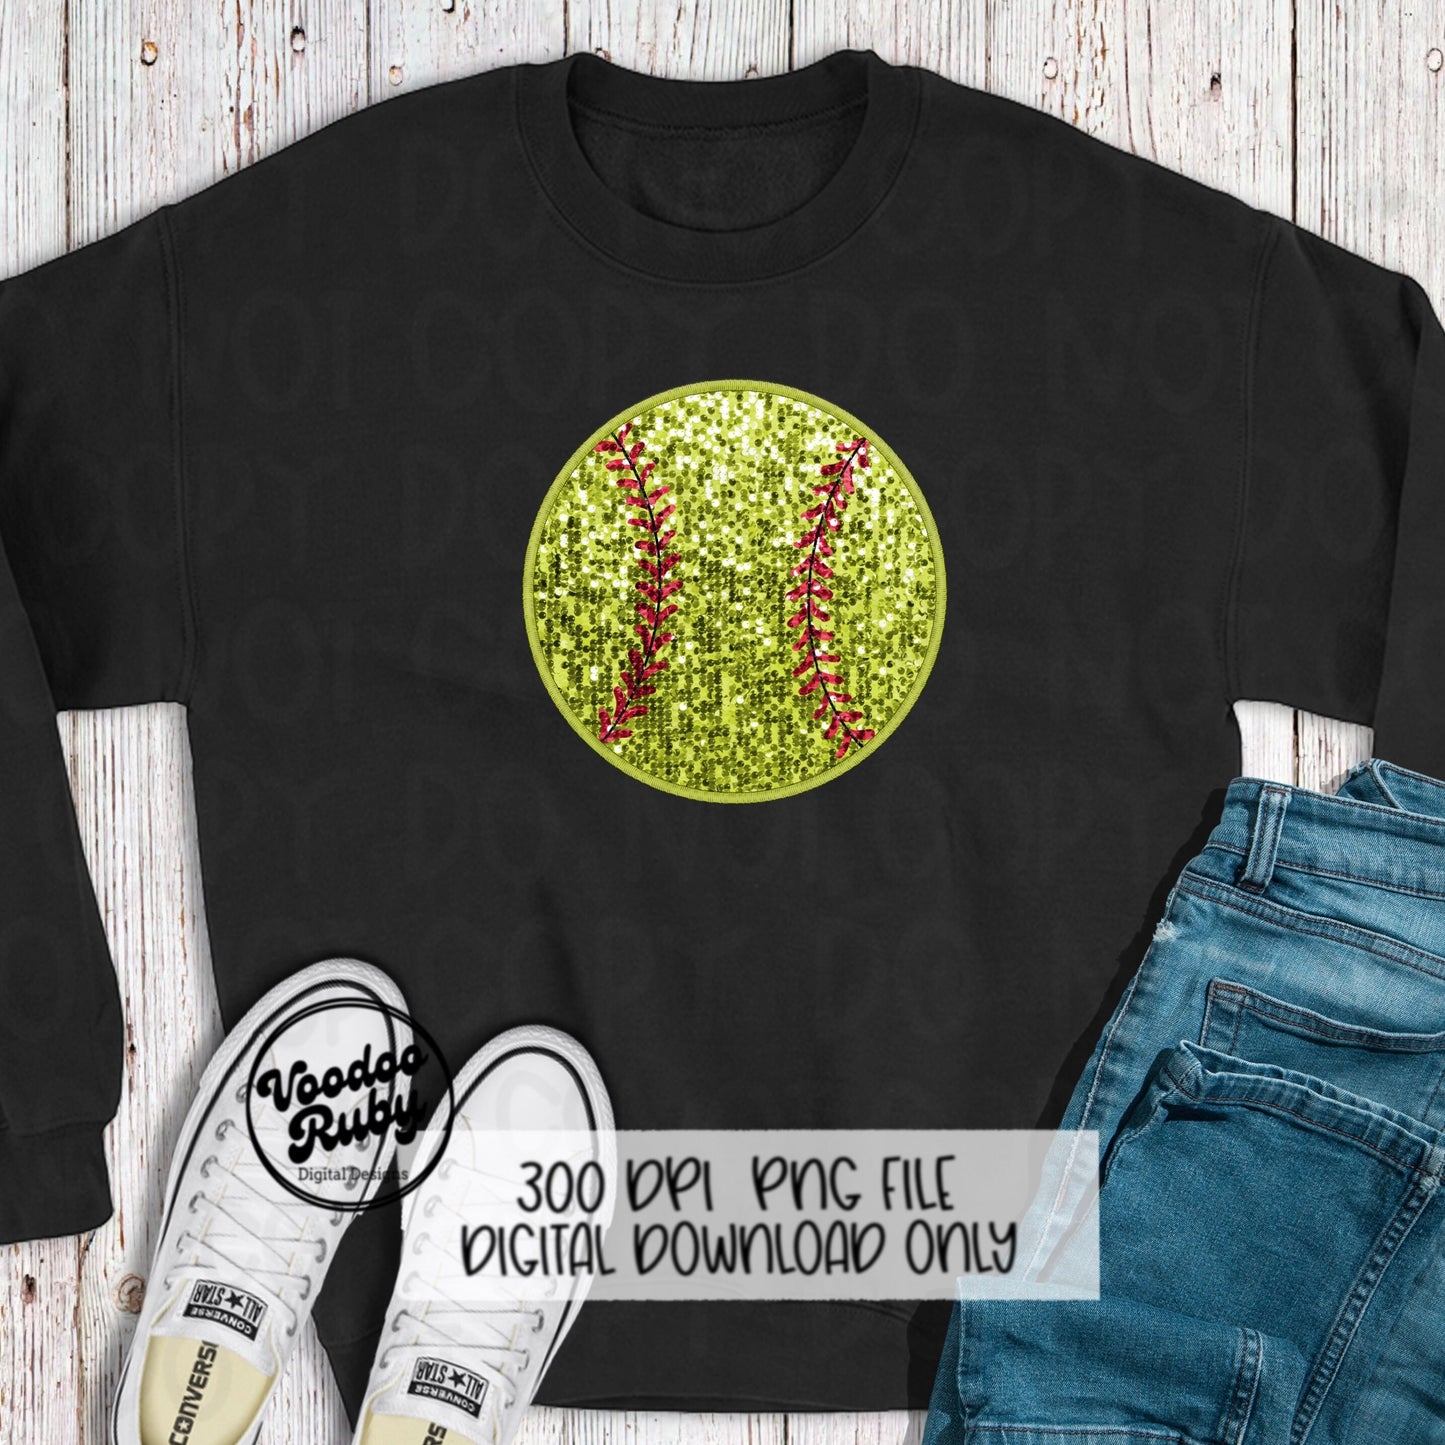 Sequin Softball PNG Design Faux Embroidery PNG Hand Digital Download Softball DTF Printable Clip Art